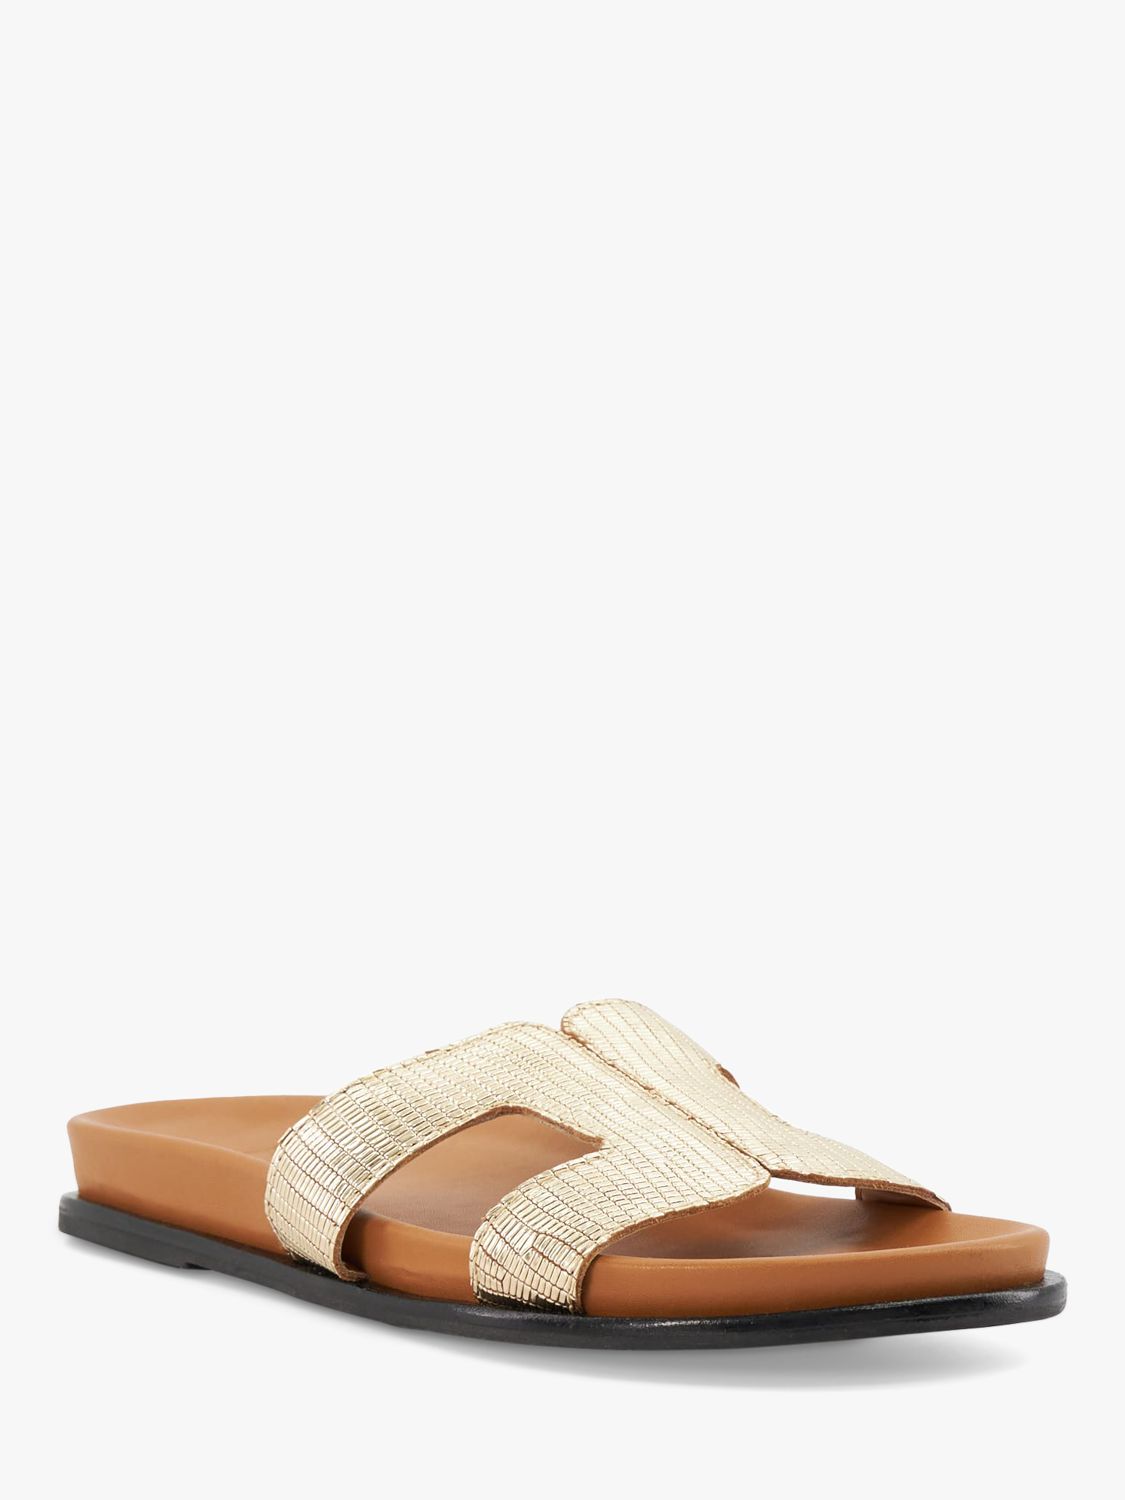 Buy Dune Loupa Leather Sandals, Gold Online at johnlewis.com